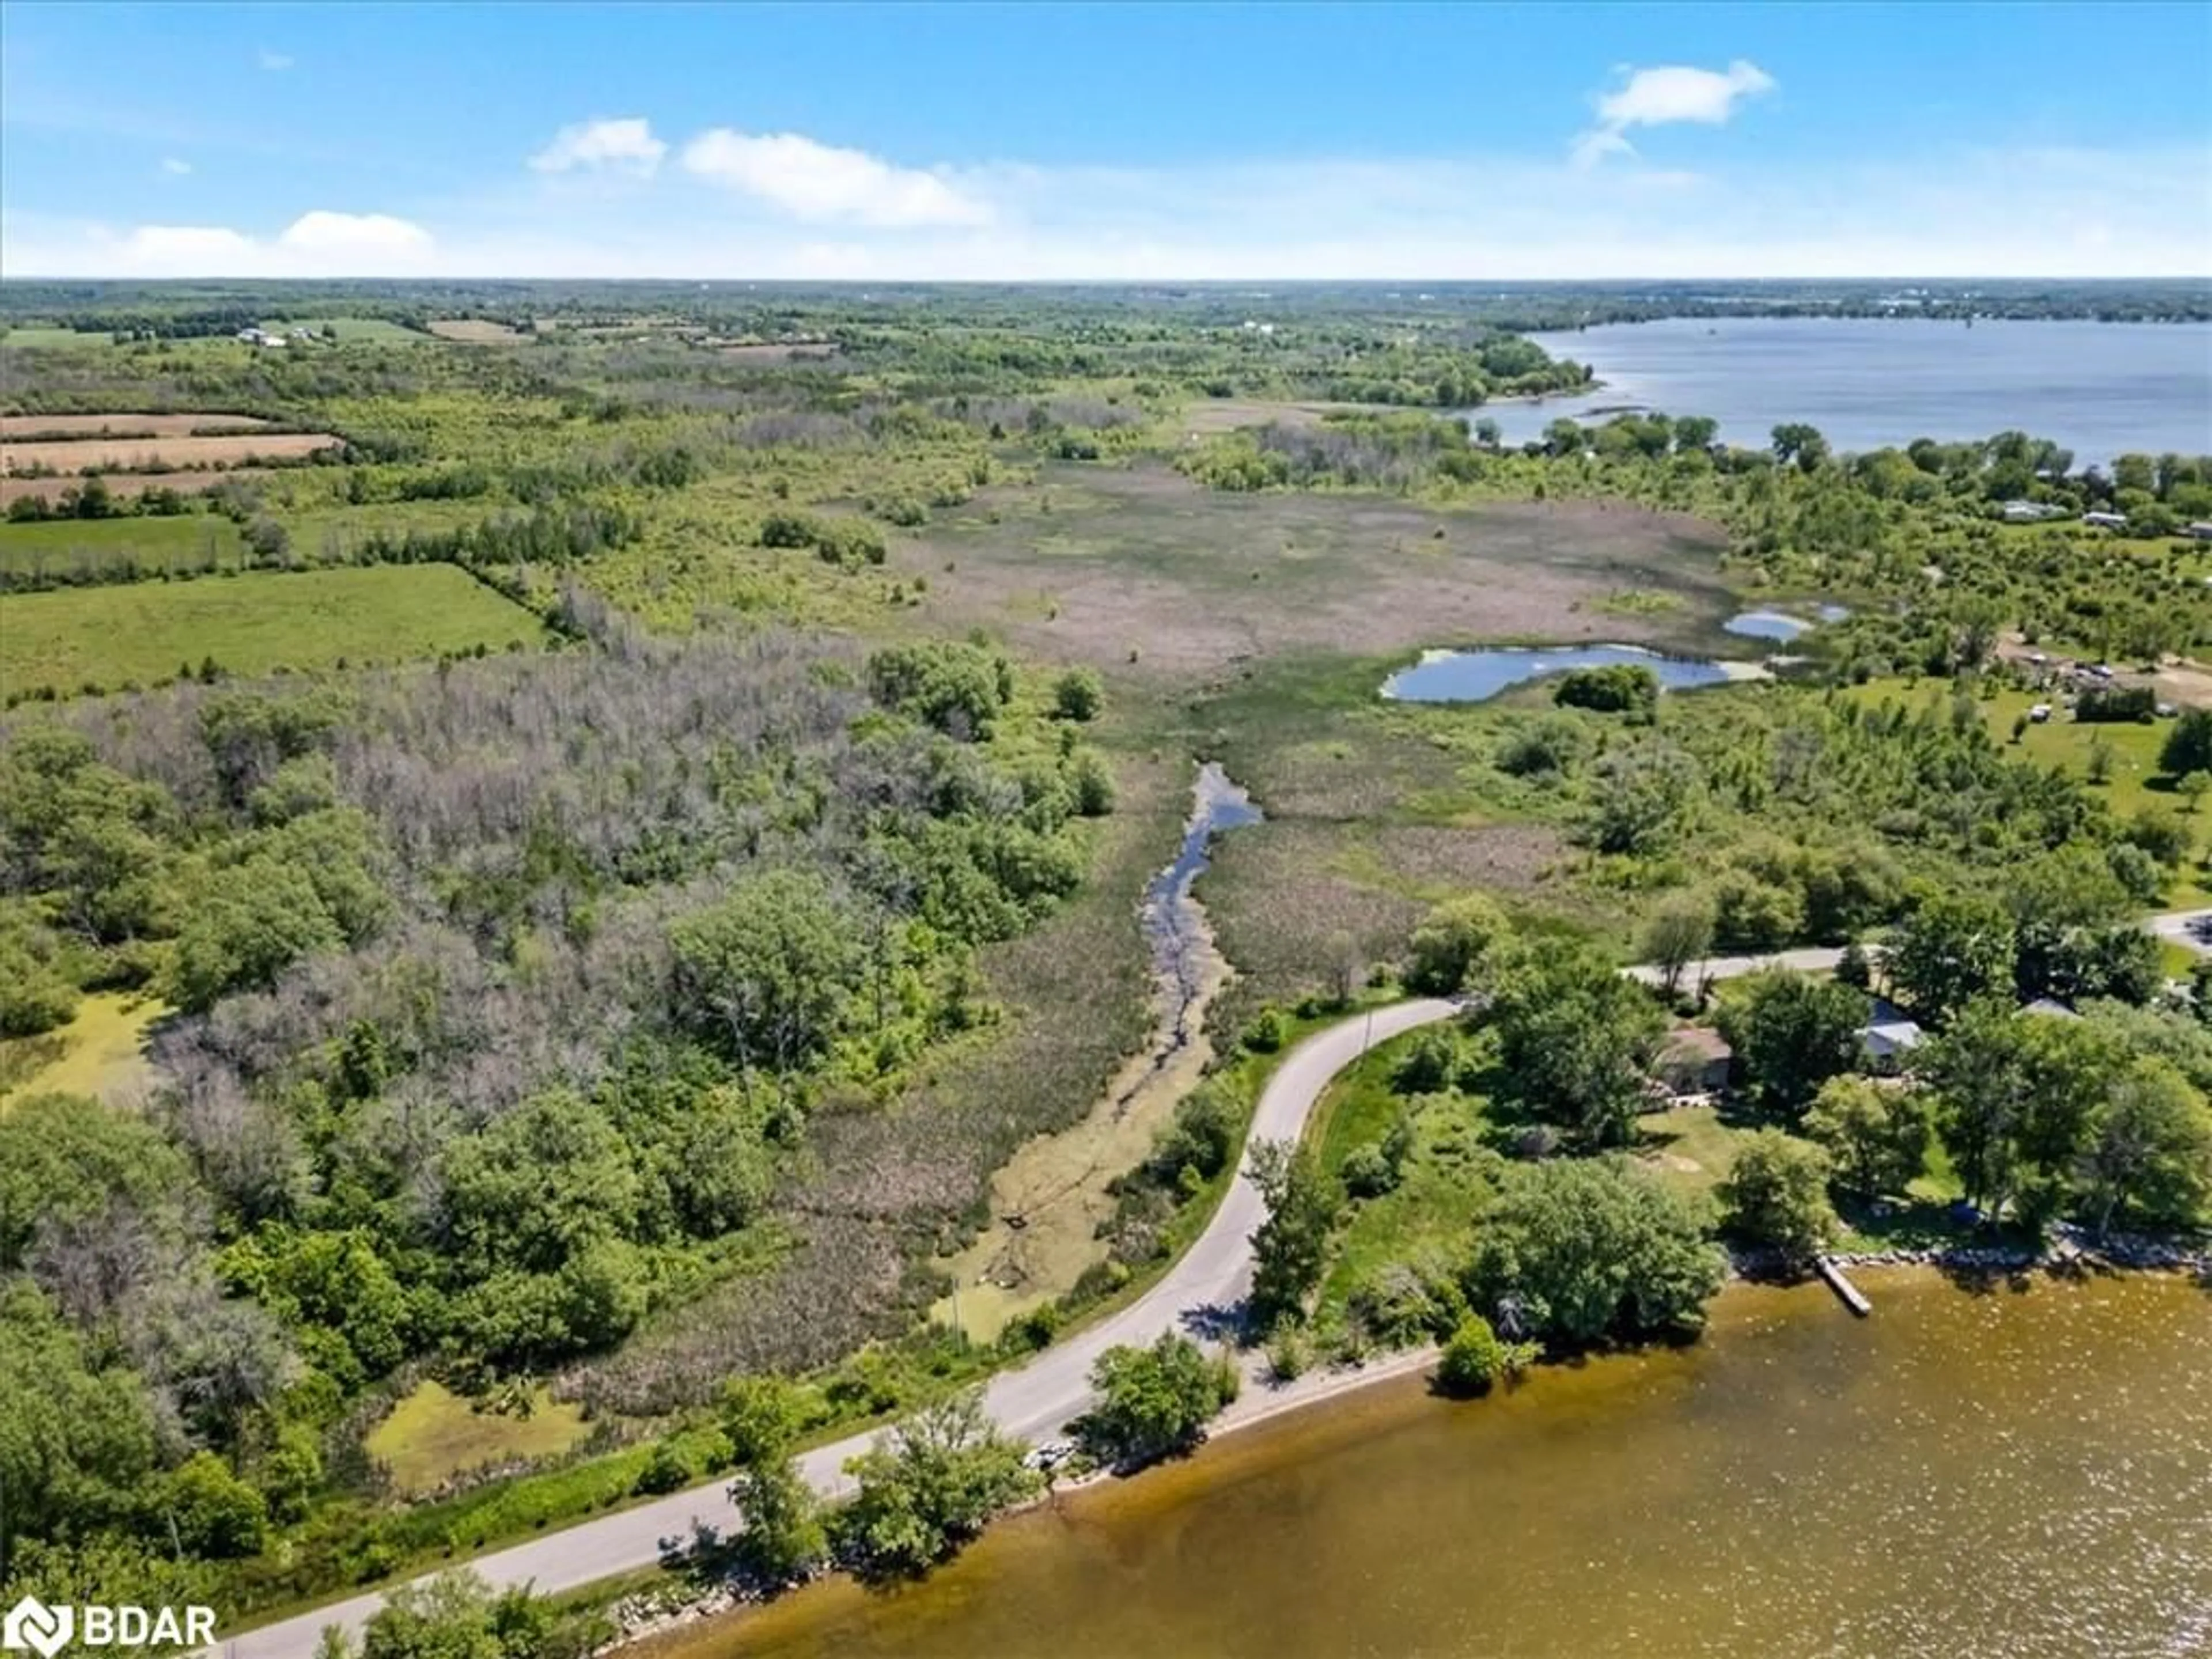 Lakeview for 209 Hiscock Shores Rd, Carrying Place Ontario K0K 1L0